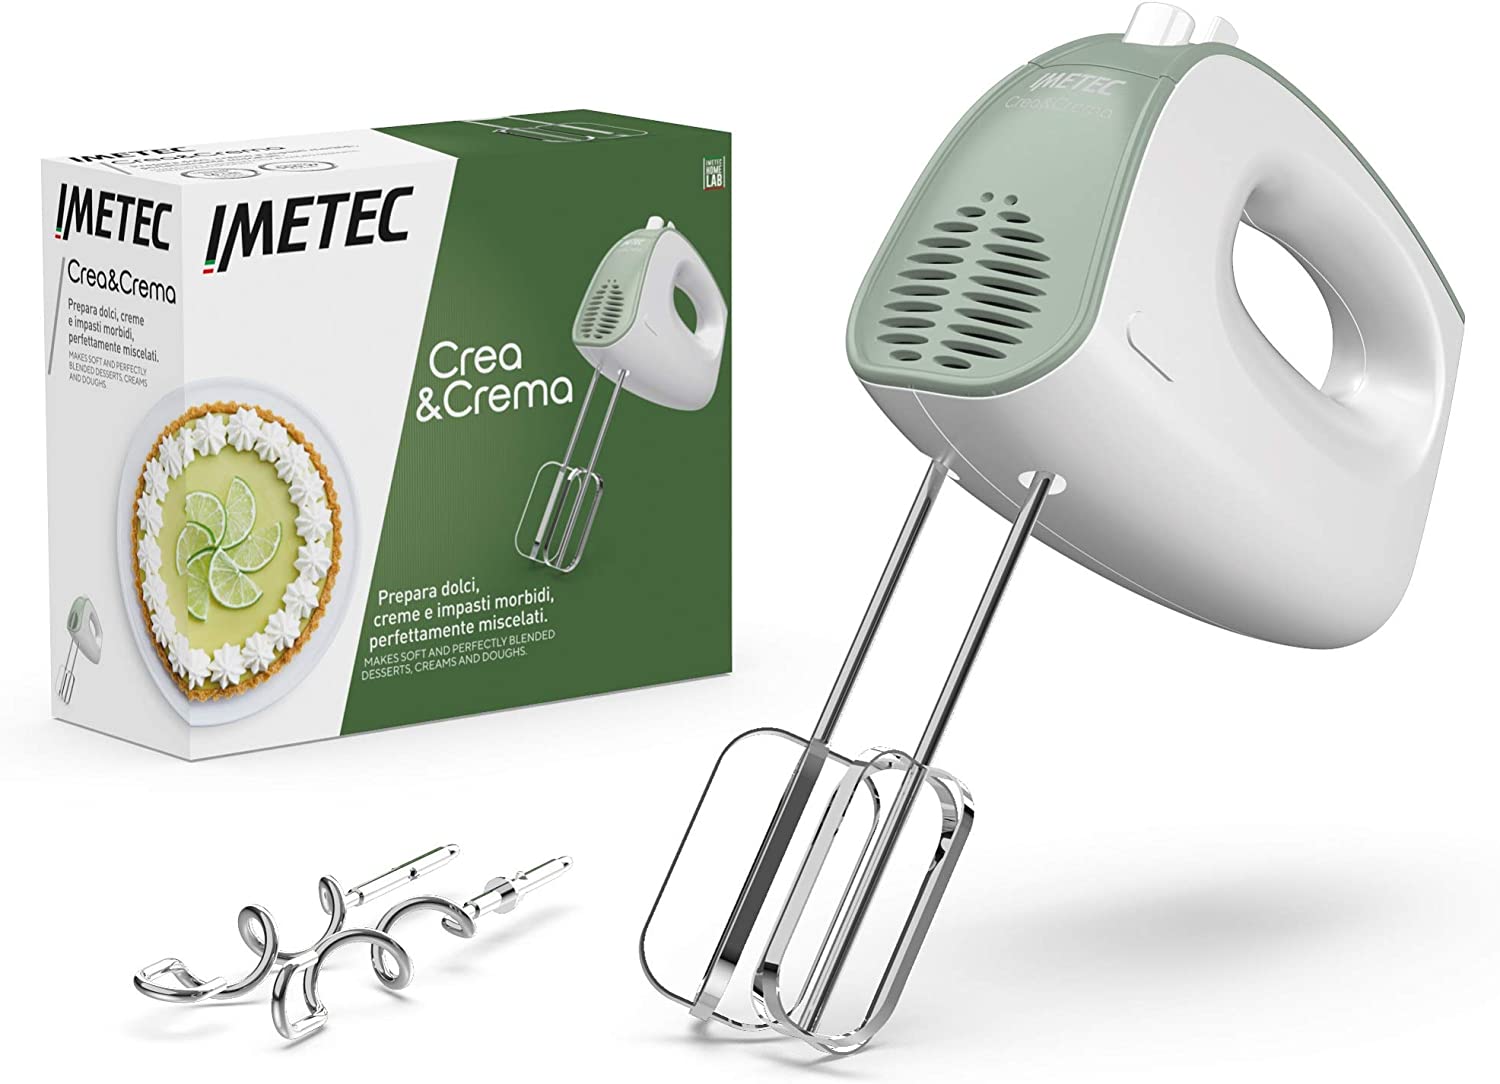 Imetec Crea & Crema Extra Long Whisk for Sweet Doughs and Whipped Cream Stainless Steel Dough Hook 5 Speeds Turbo Function Ergonomic Design 500W